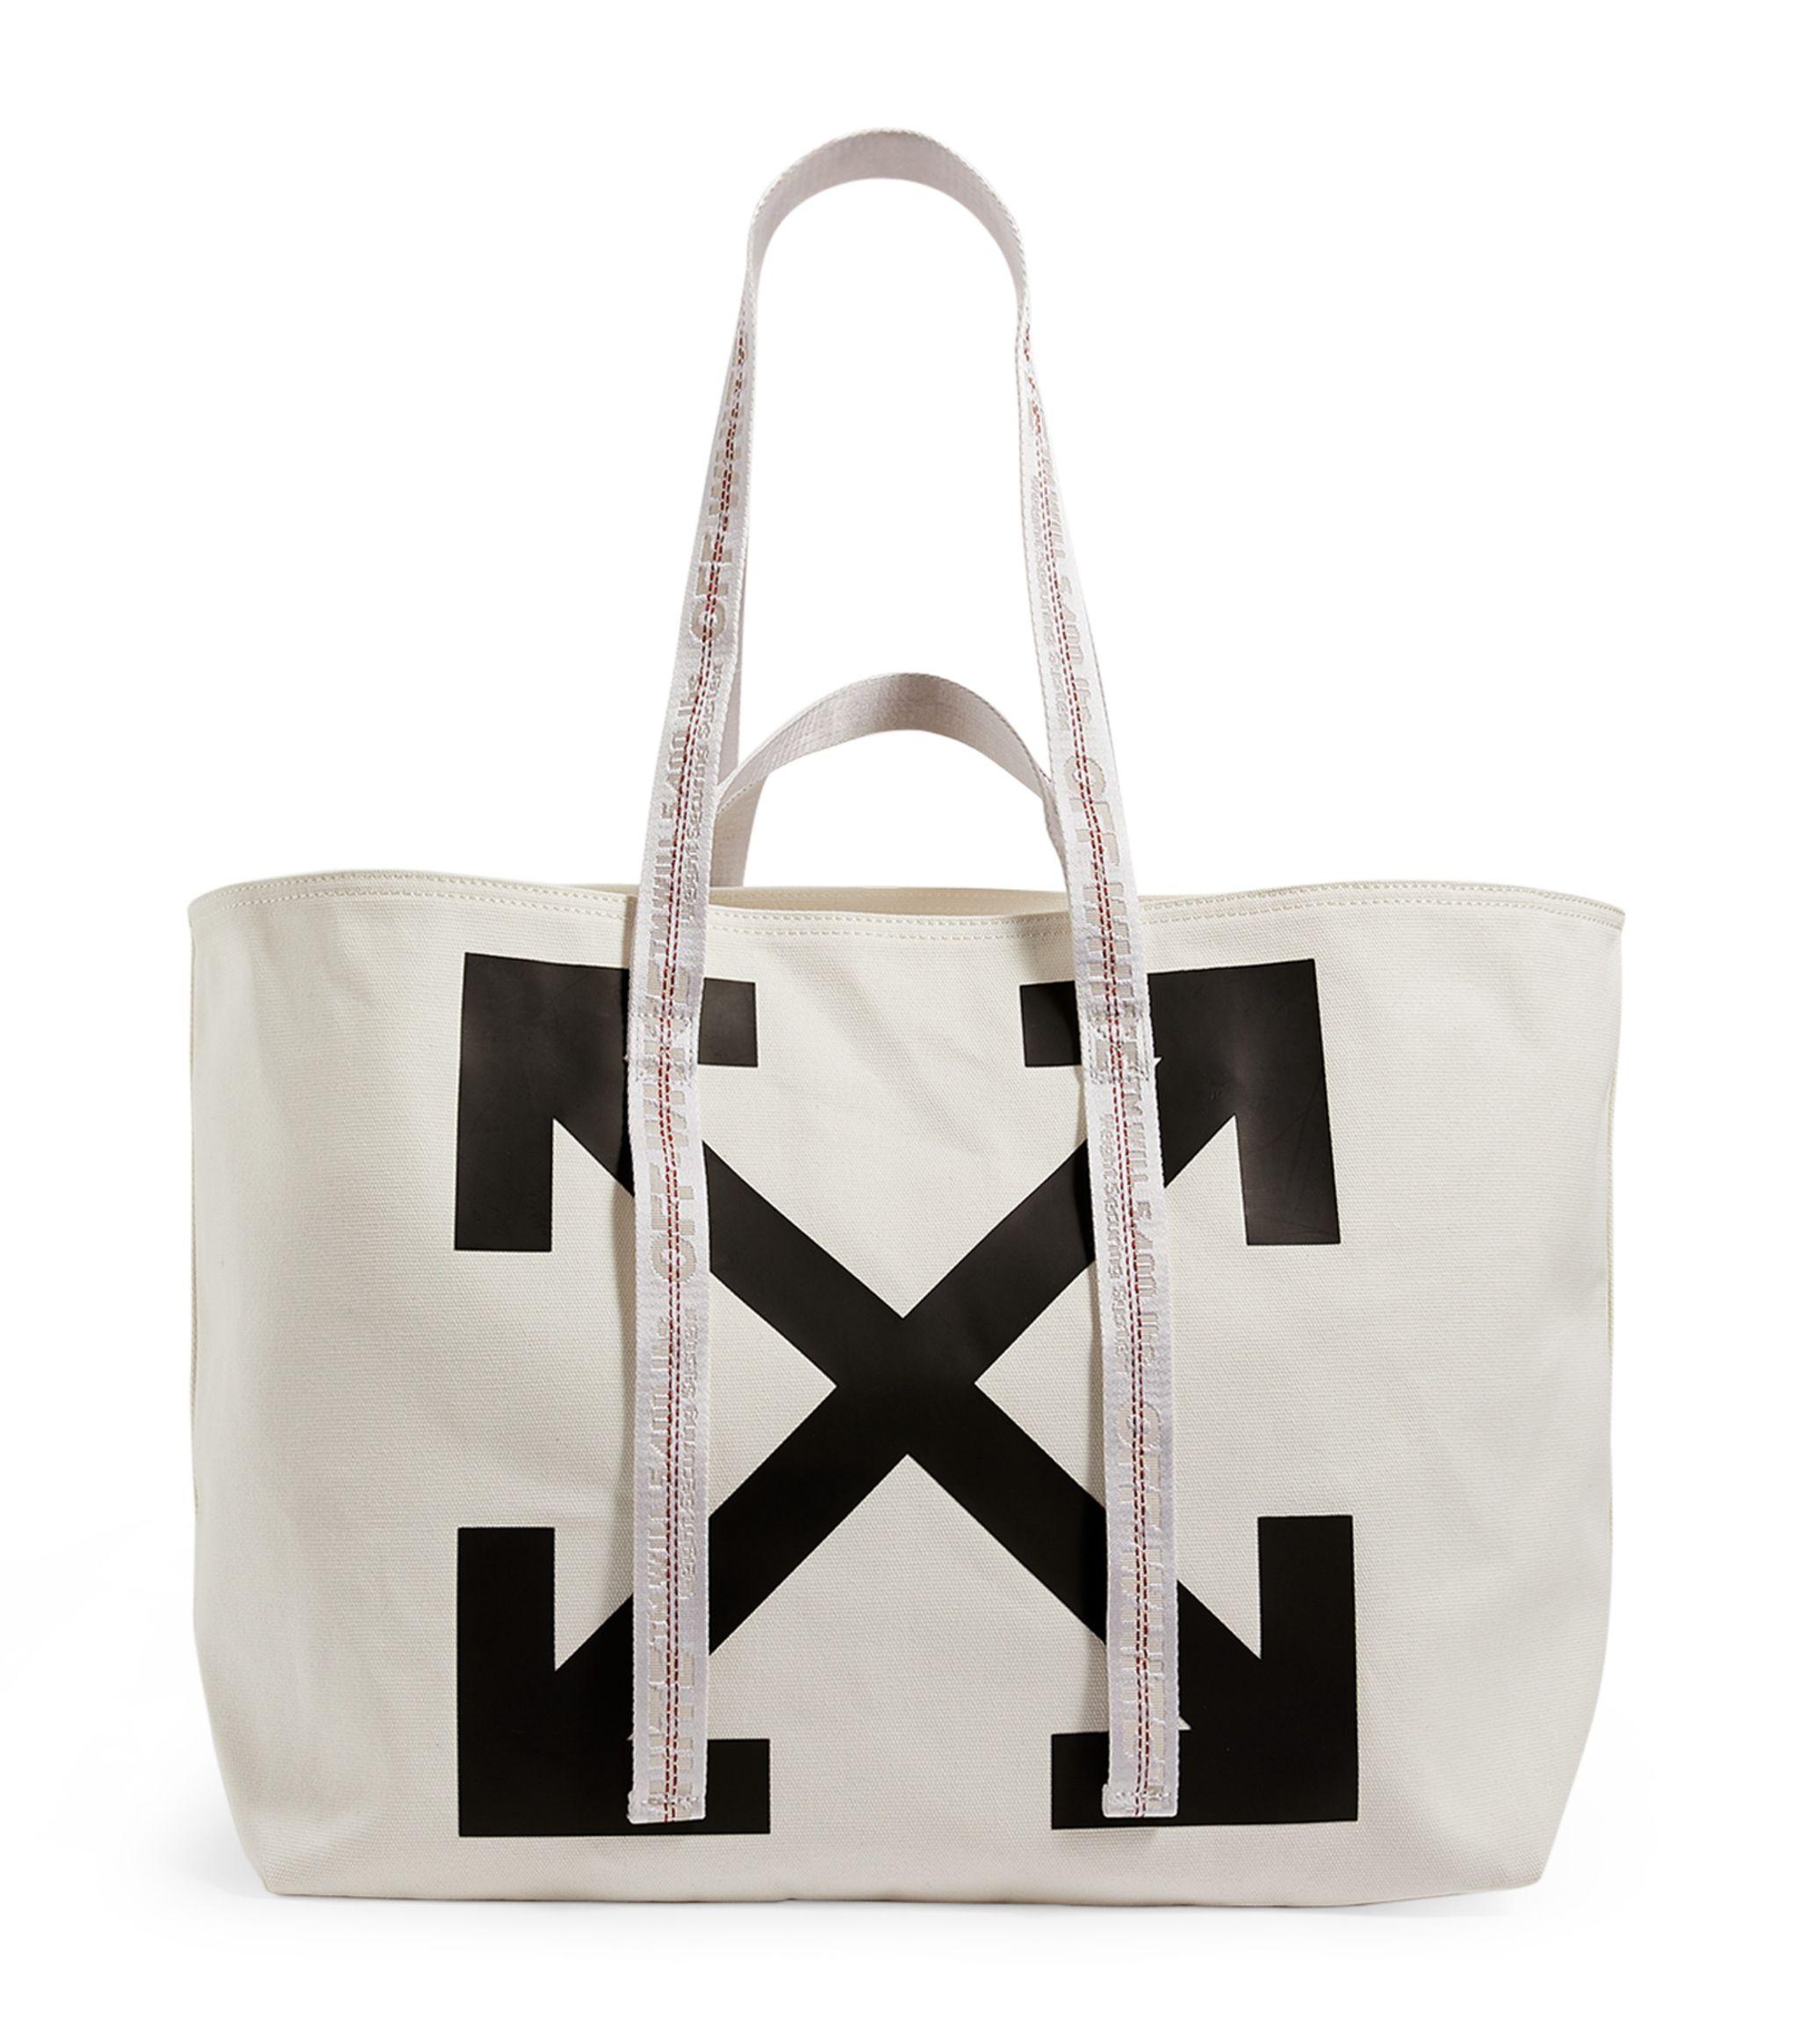 Off-White Large Metallic Commercial Tote Bag - Farfetch